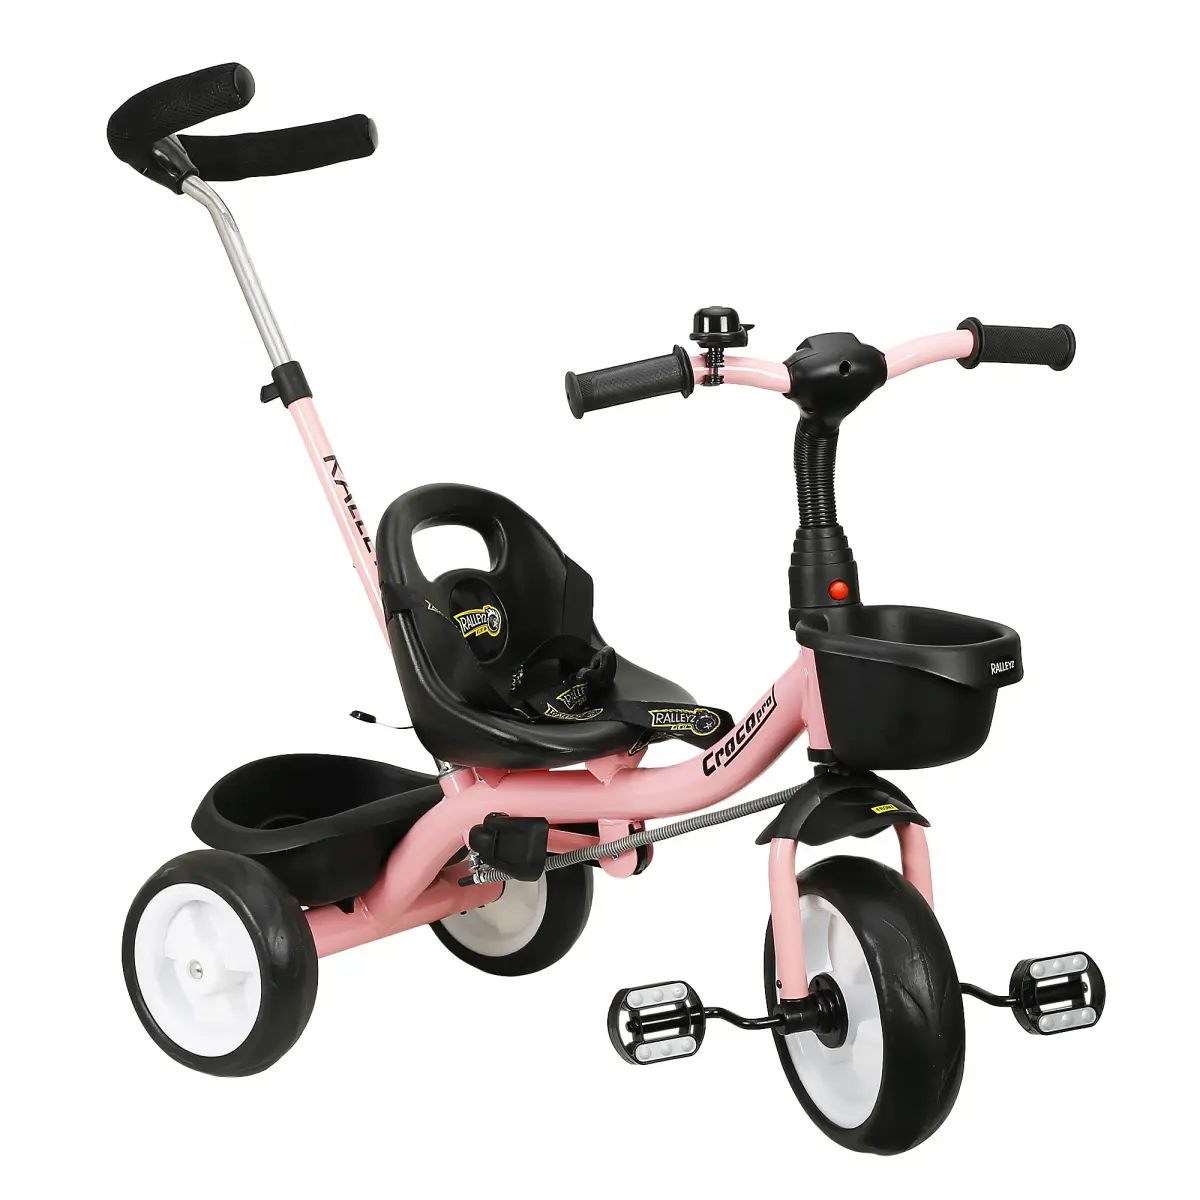 Ralleyz Tricycle Plug N Play Kids/Baby Tricycle with Parental Control, Cushion seat, For Boys & Girls, Kids for 2Y+, Pink